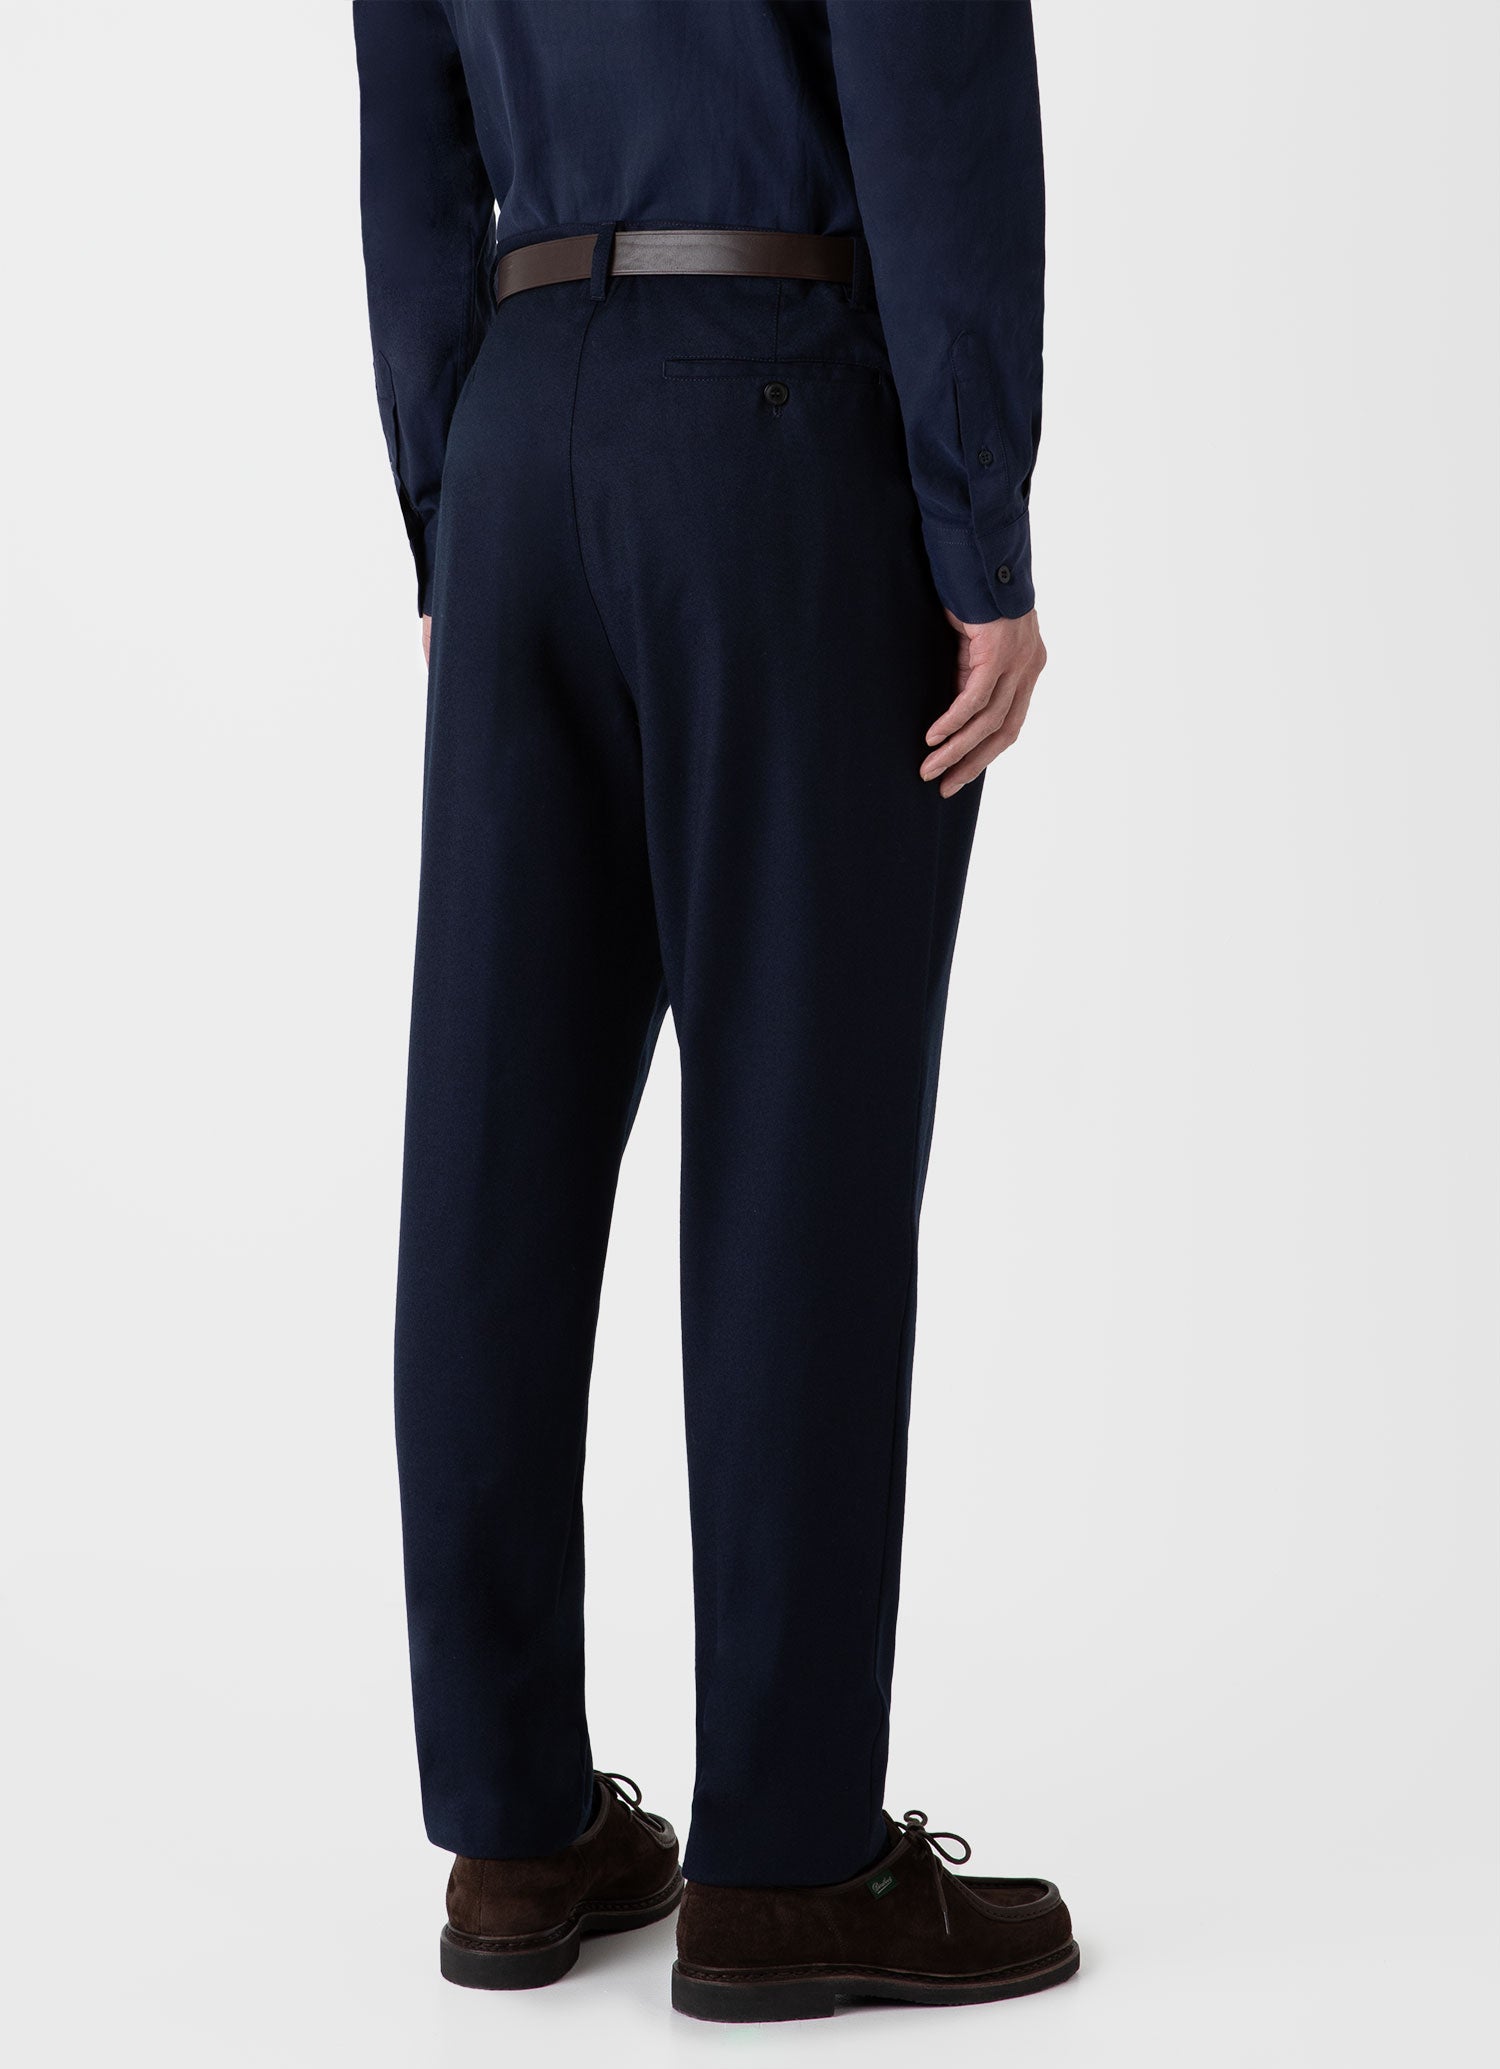 Share more than 252 navy wool trousers latest